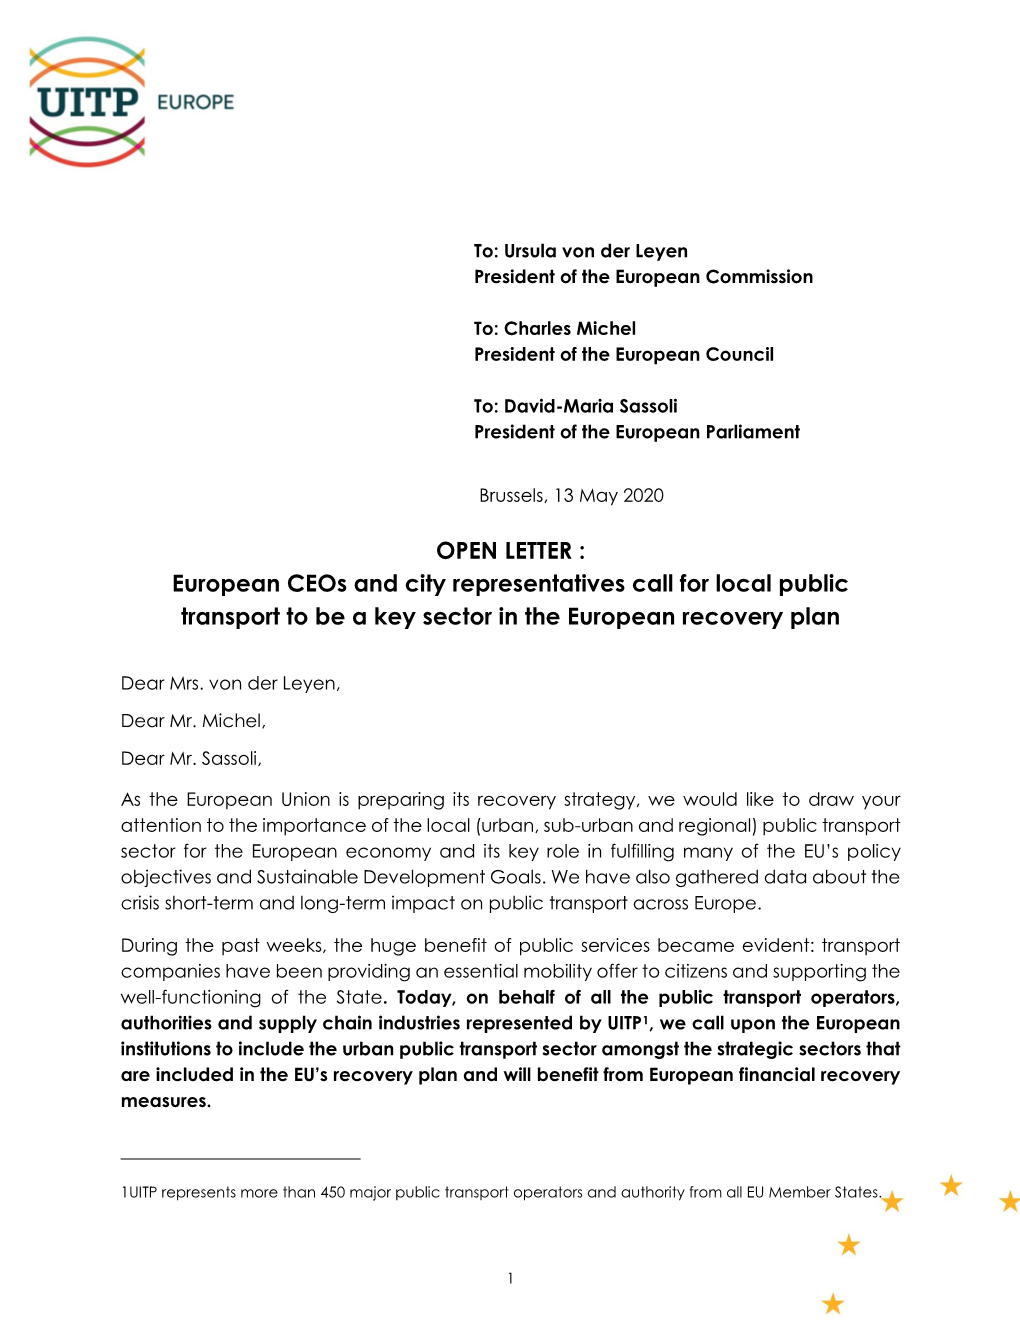 OPEN LETTER : European Ceos and City Representatives Call for Local Public Transport to Be a Key Sector in the European Recovery Plan